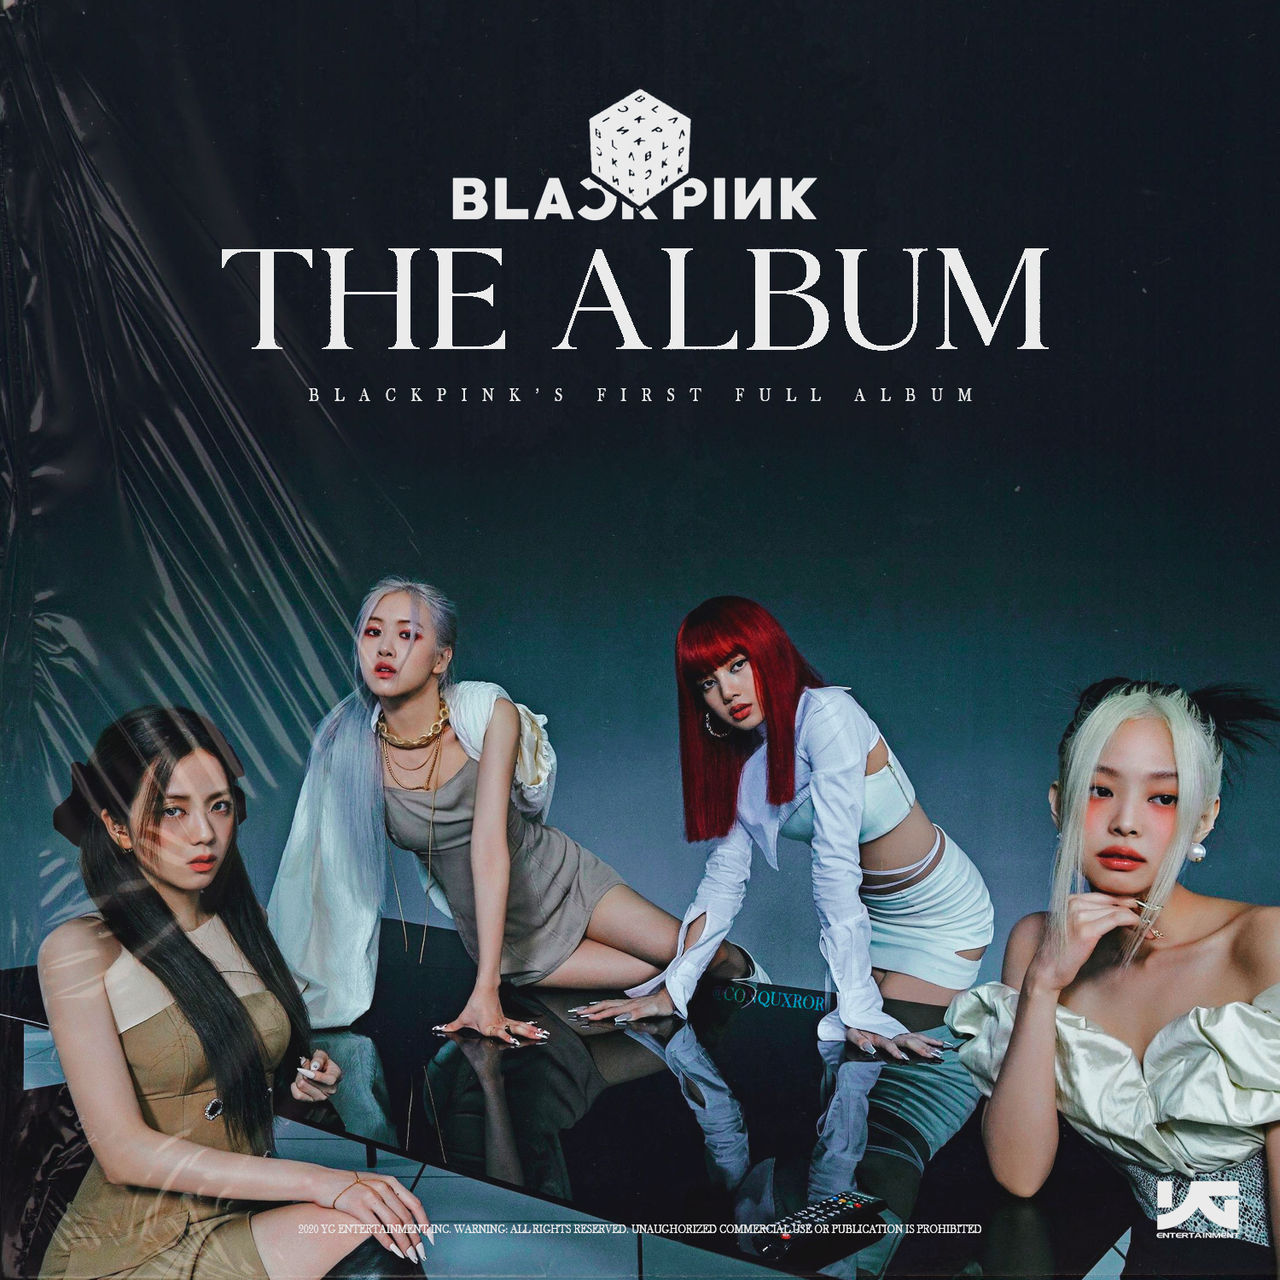 BLACKPINK - THE ALBUM (fanmade album cover) by conquxror on DeviantArt